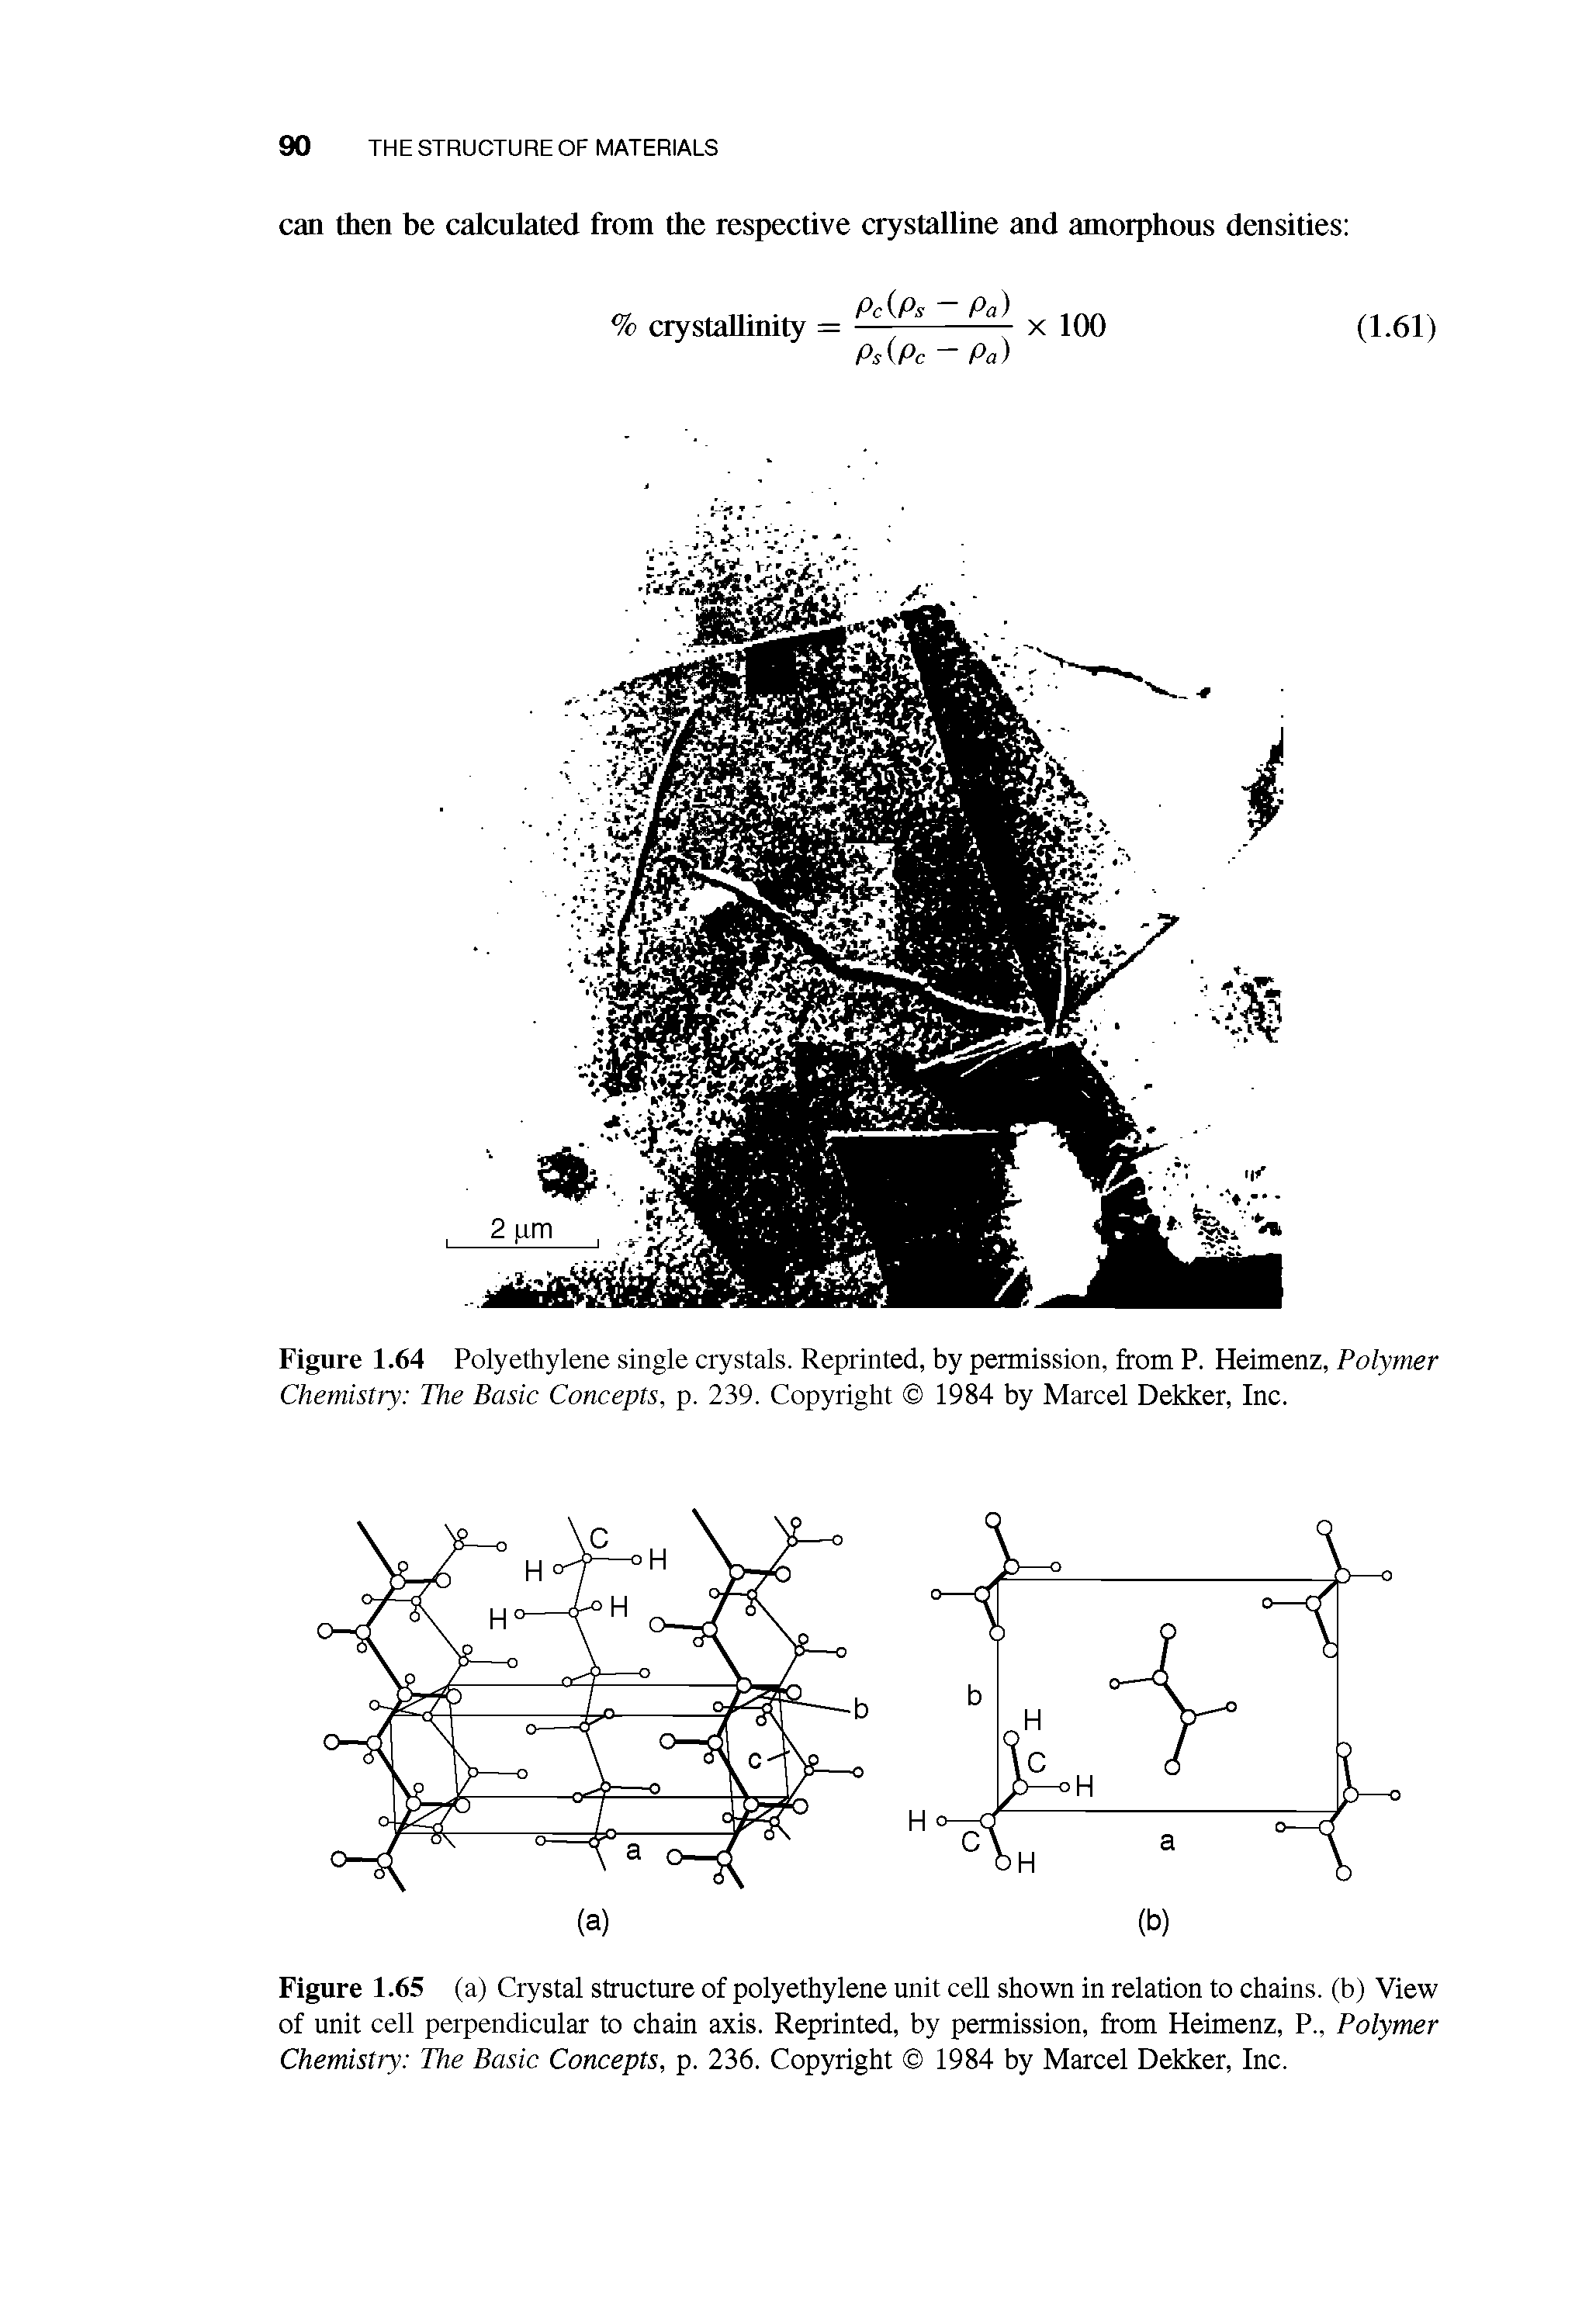 Figure 1.64 Polyethylene single crystals. Reprinted, by permission, from P. Heimenz, Polymer Chemistry The Basic Concepts, p. 239. Copyright 1984 by Marcel Dekker, Inc.